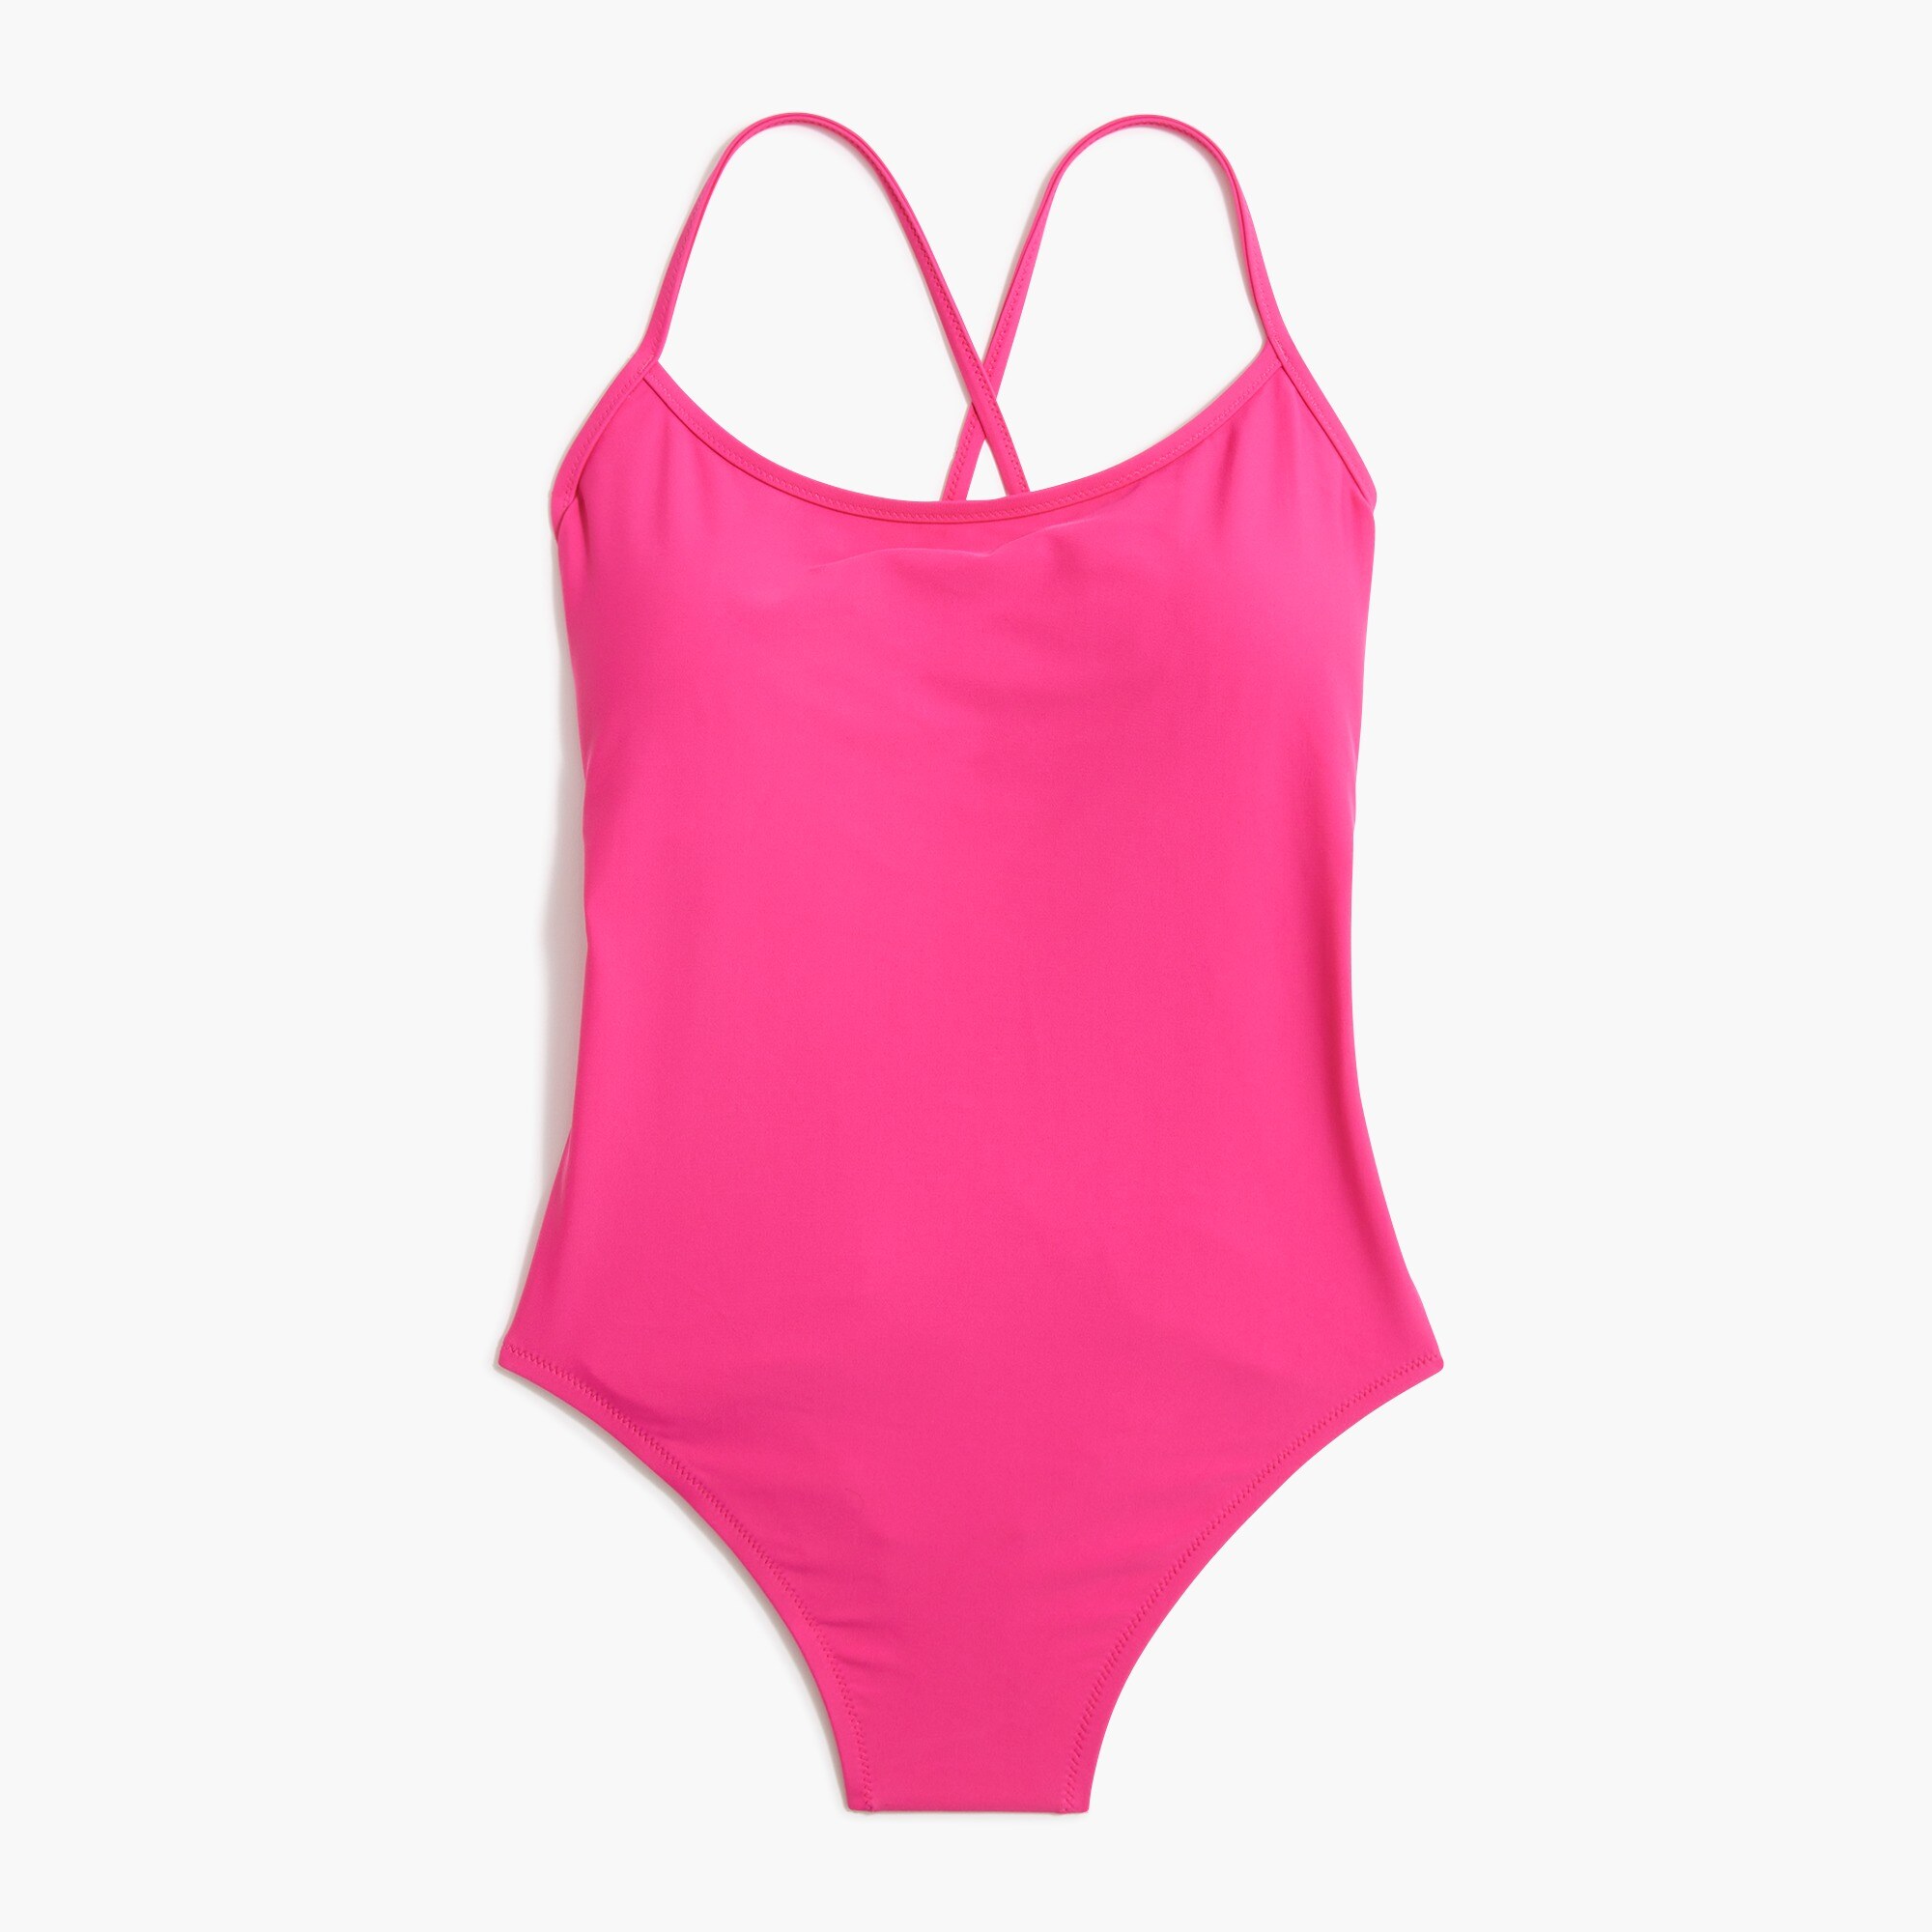 womens One-piece swimsuit with crisscross back